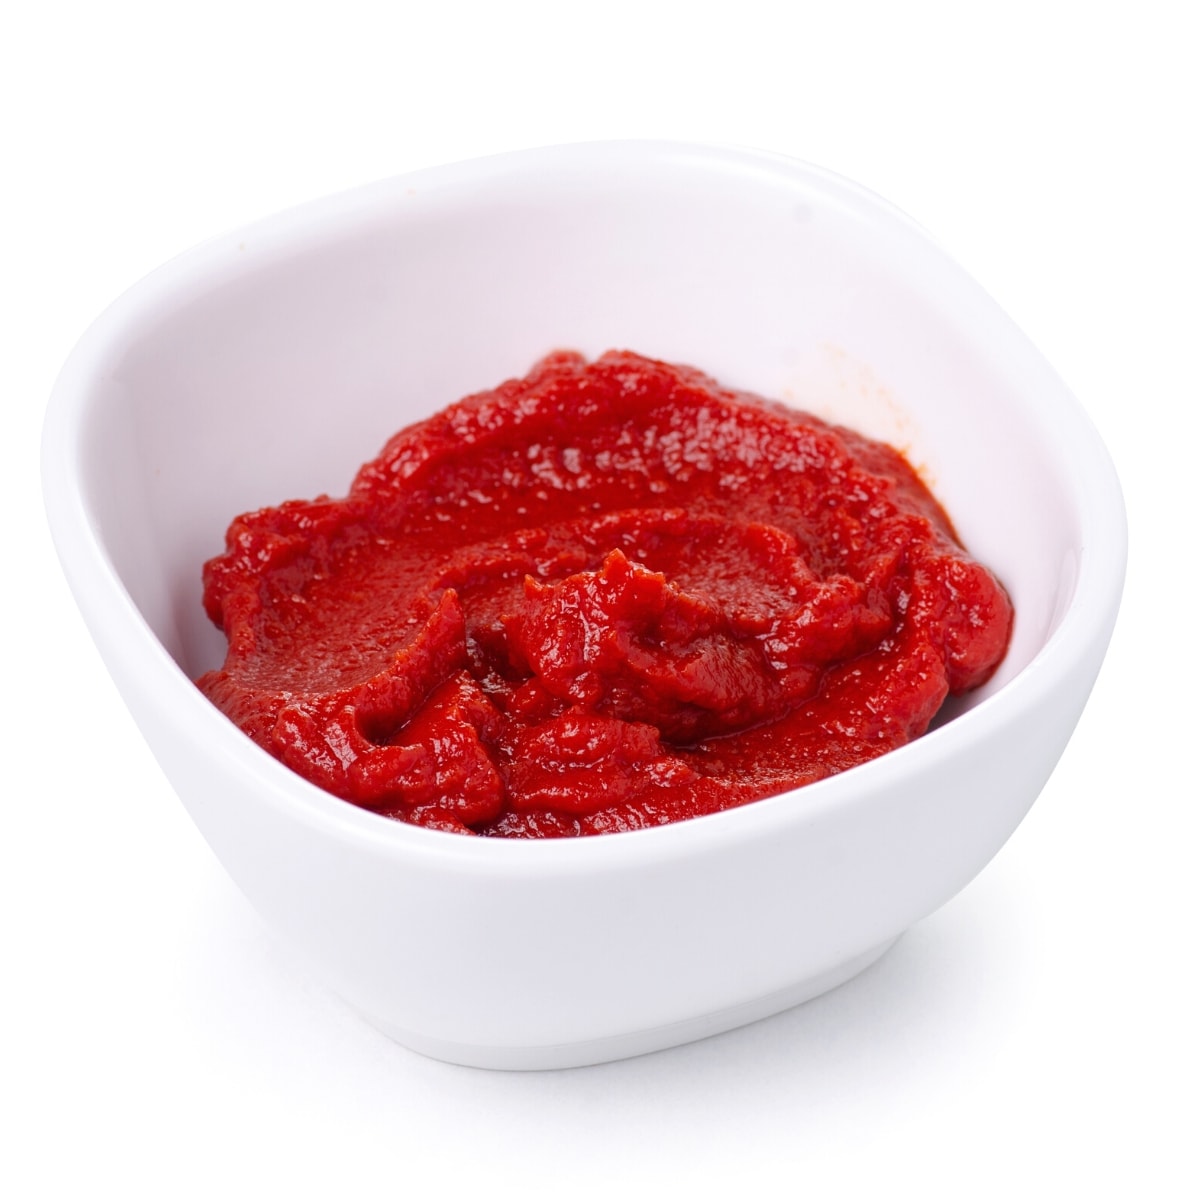 A white ceramic bowl filled with thick red tomato paste.